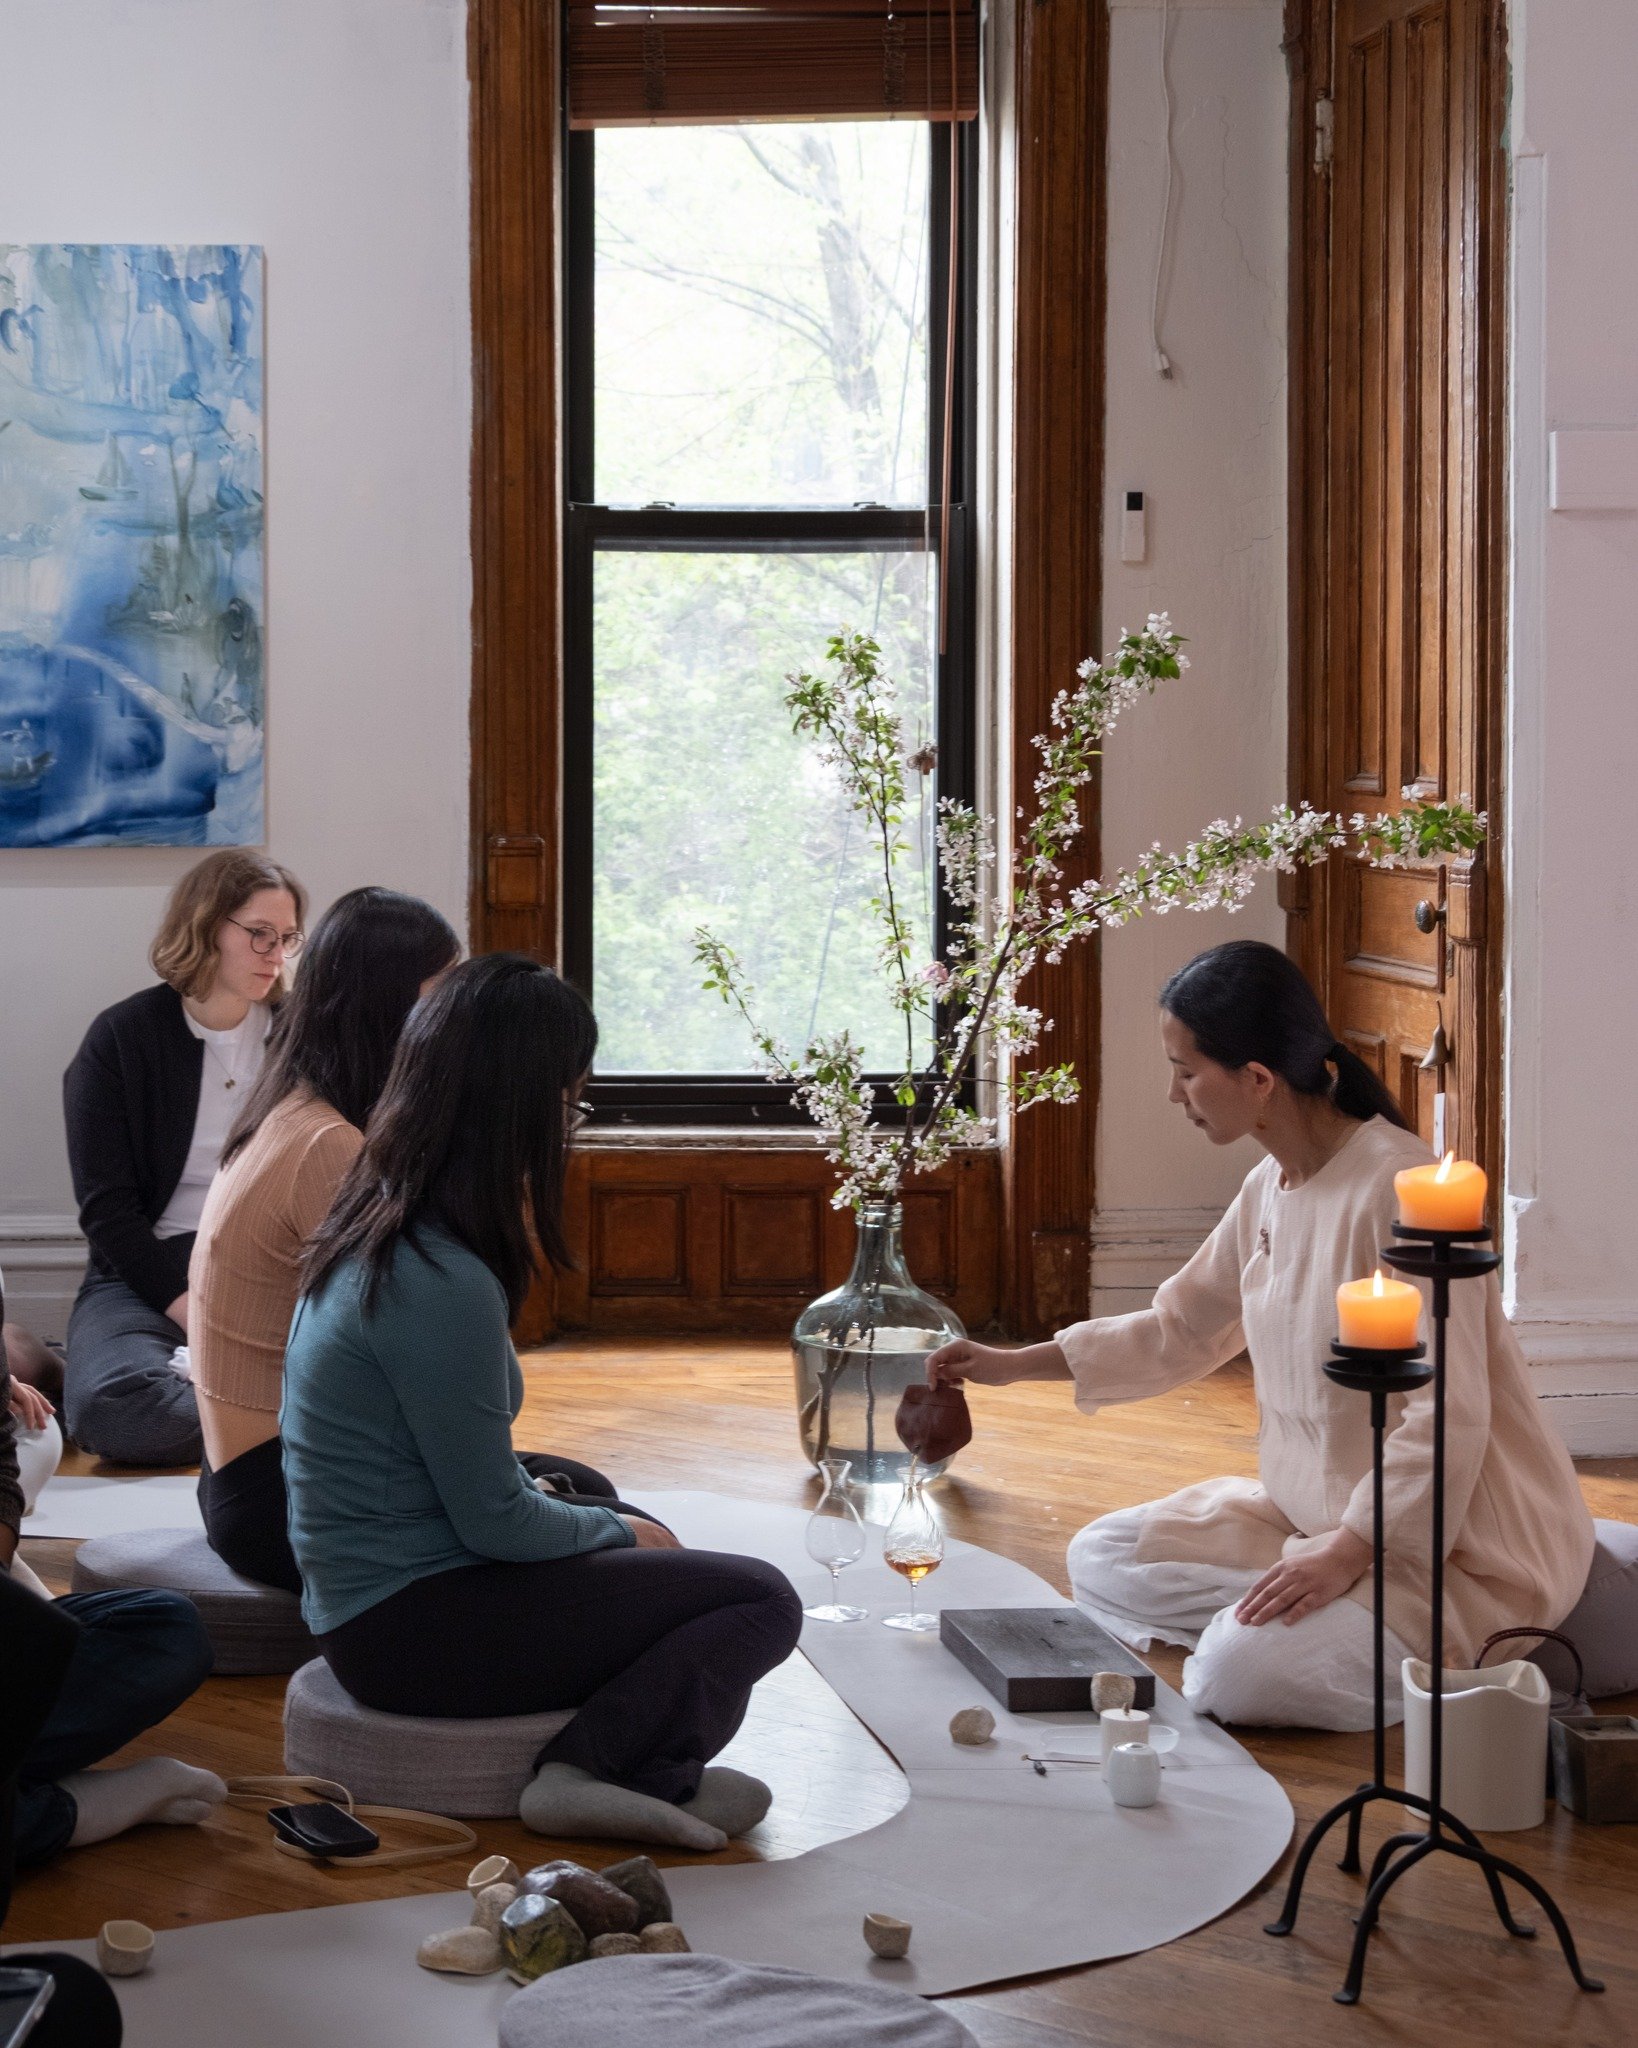 It has been over two months since we first hosted the &quot;Tea Alchemy&quot; experimental tea ceremony. The view outside @fougallery has transitioned from snow-laden branches to lush greenery, and our &quot;Tea Alchemy&quot; series now welcomes a ne